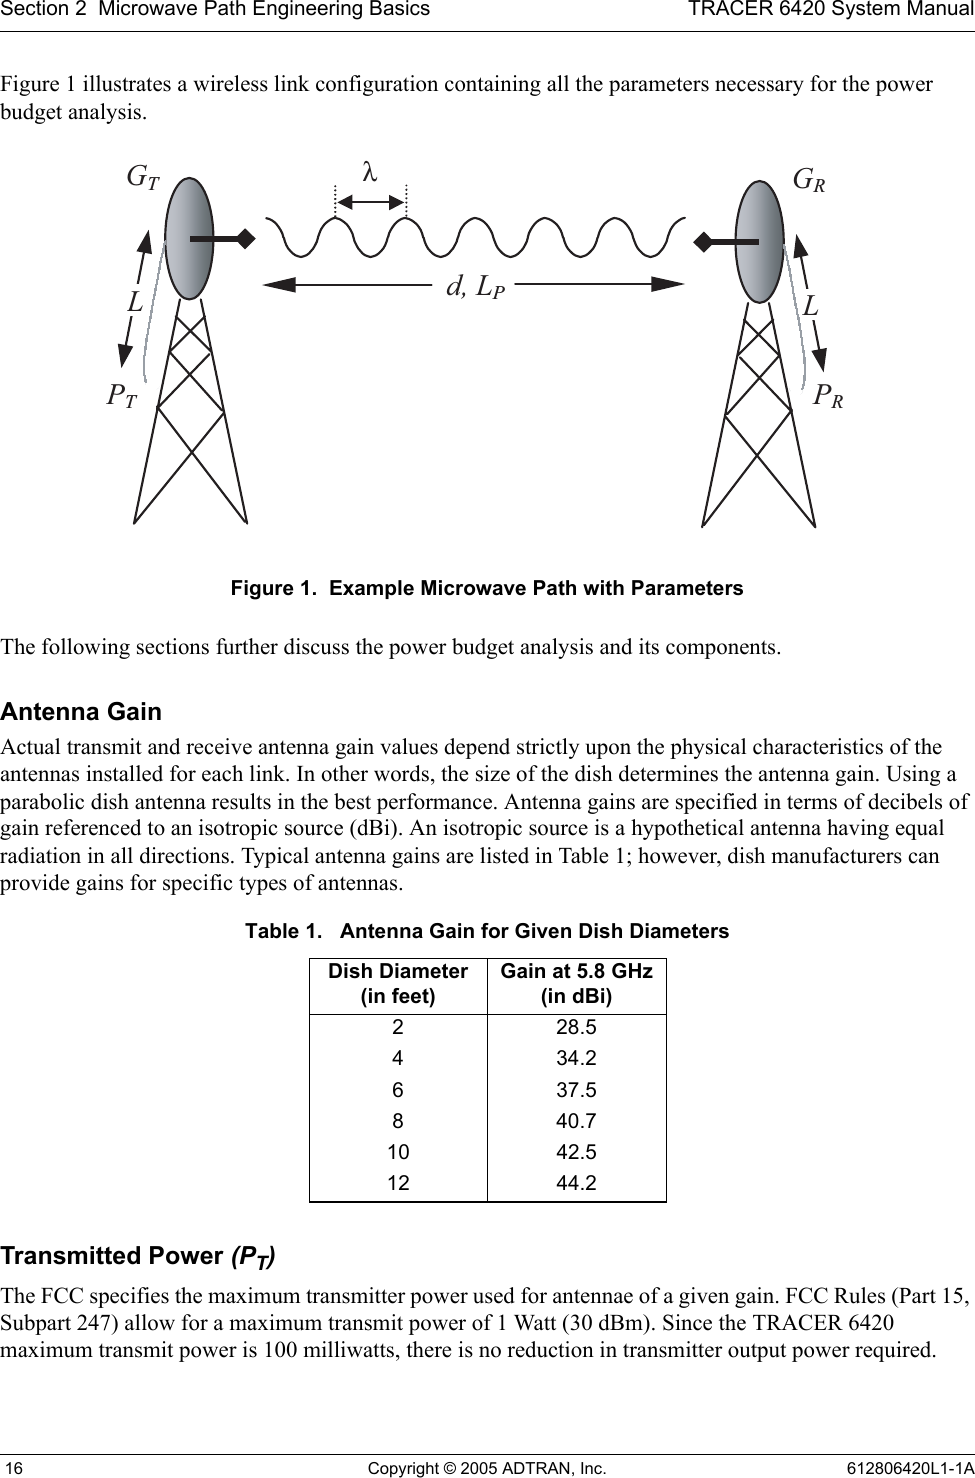 Section 2  Microwave Path Engineering Basics TRACER 6420 System Manual 16 Copyright © 2005 ADTRAN, Inc. 612806420L1-1AFigure 1 illustrates a wireless link configuration containing all the parameters necessary for the power budget analysis.Figure 1.  Example Microwave Path with ParametersThe following sections further discuss the power budget analysis and its components.Antenna GainActual transmit and receive antenna gain values depend strictly upon the physical characteristics of the antennas installed for each link. In other words, the size of the dish determines the antenna gain. Using a parabolic dish antenna results in the best performance. Antenna gains are specified in terms of decibels of gain referenced to an isotropic source (dBi). An isotropic source is a hypothetical antenna having equal radiation in all directions. Typical antenna gains are listed in Table 1; however, dish manufacturers can provide gains for specific types of antennas.Transmitted Power (PT)The FCC specifies the maximum transmitter power used for antennae of a given gain. FCC Rules (Part 15, Subpart 247) allow for a maximum transmit power of 1 Watt (30 dBm). Since the TRACER 6420 maximum transmit power is 100 milliwatts, there is no reduction in transmitter output power required.Table 1.   Antenna Gain for Given Dish DiametersDish Diameter(in feet)Gain at 5.8 GHz(in dBi)228.5434.2637.5840.710 42.512 44.2 GTGRd, LPPTPRλLL